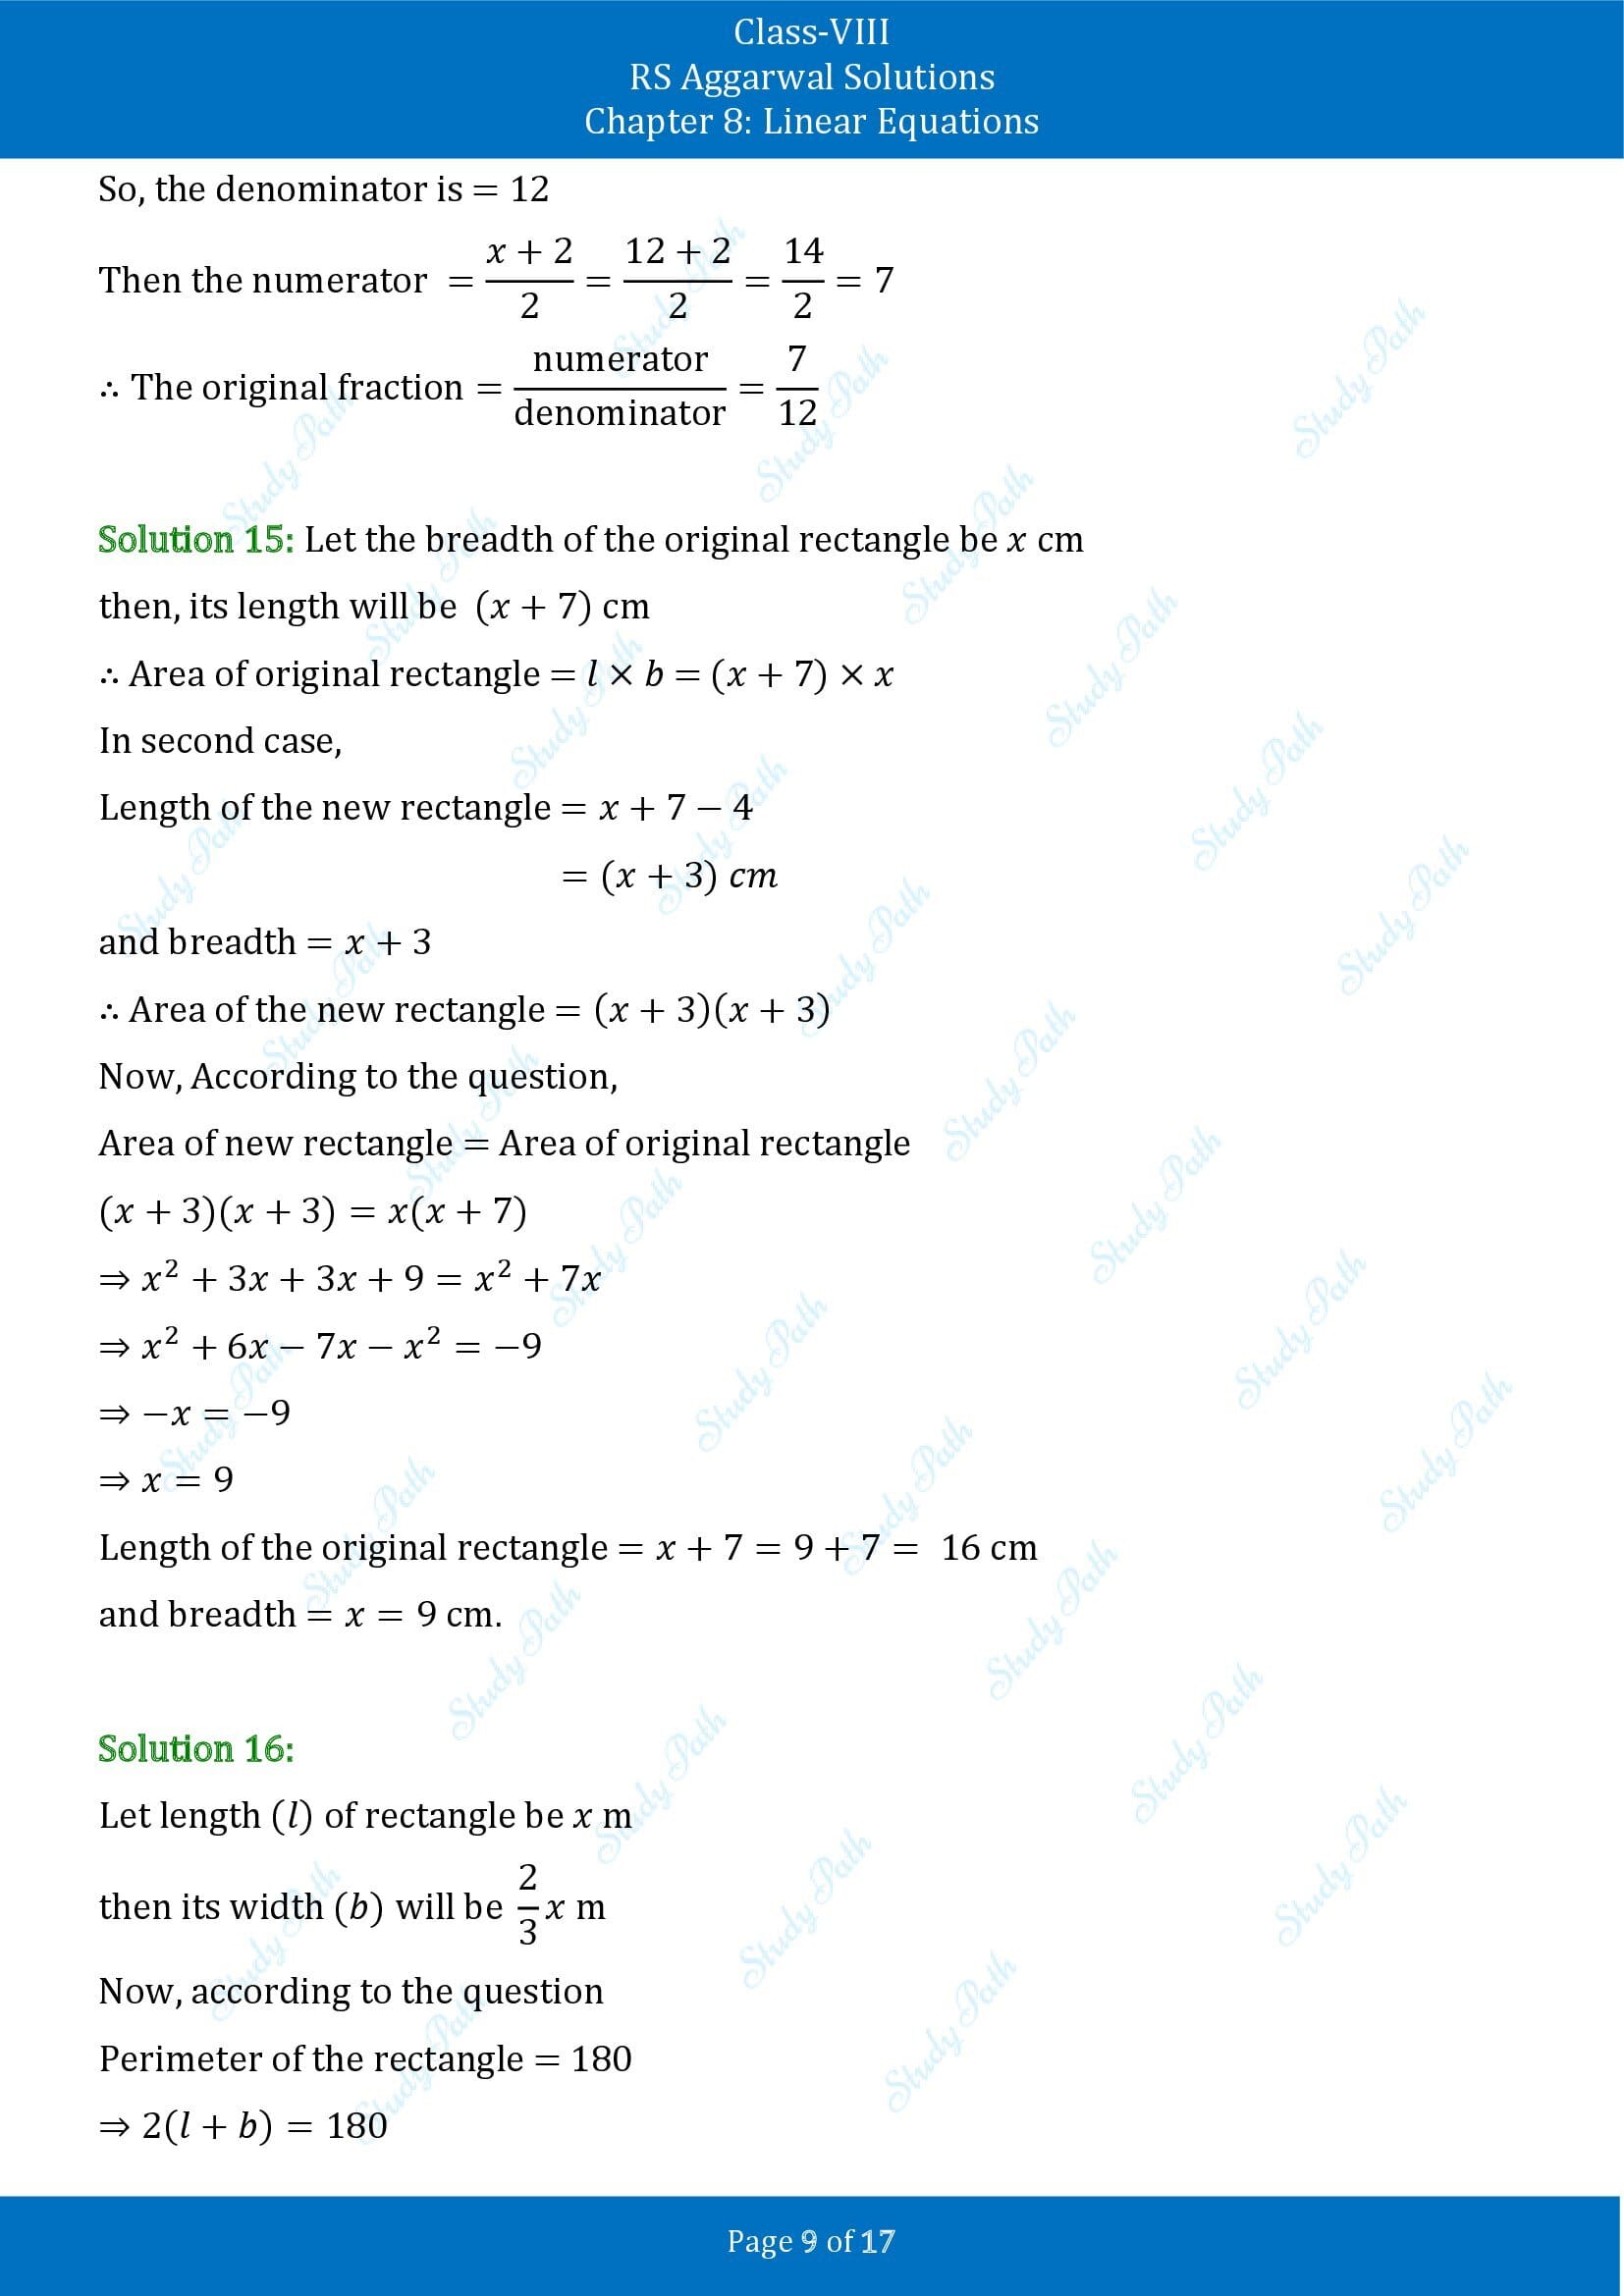 RS Aggarwal Solutions Class 8 Chapter 8 Linear Equations Exercise 8B 00009